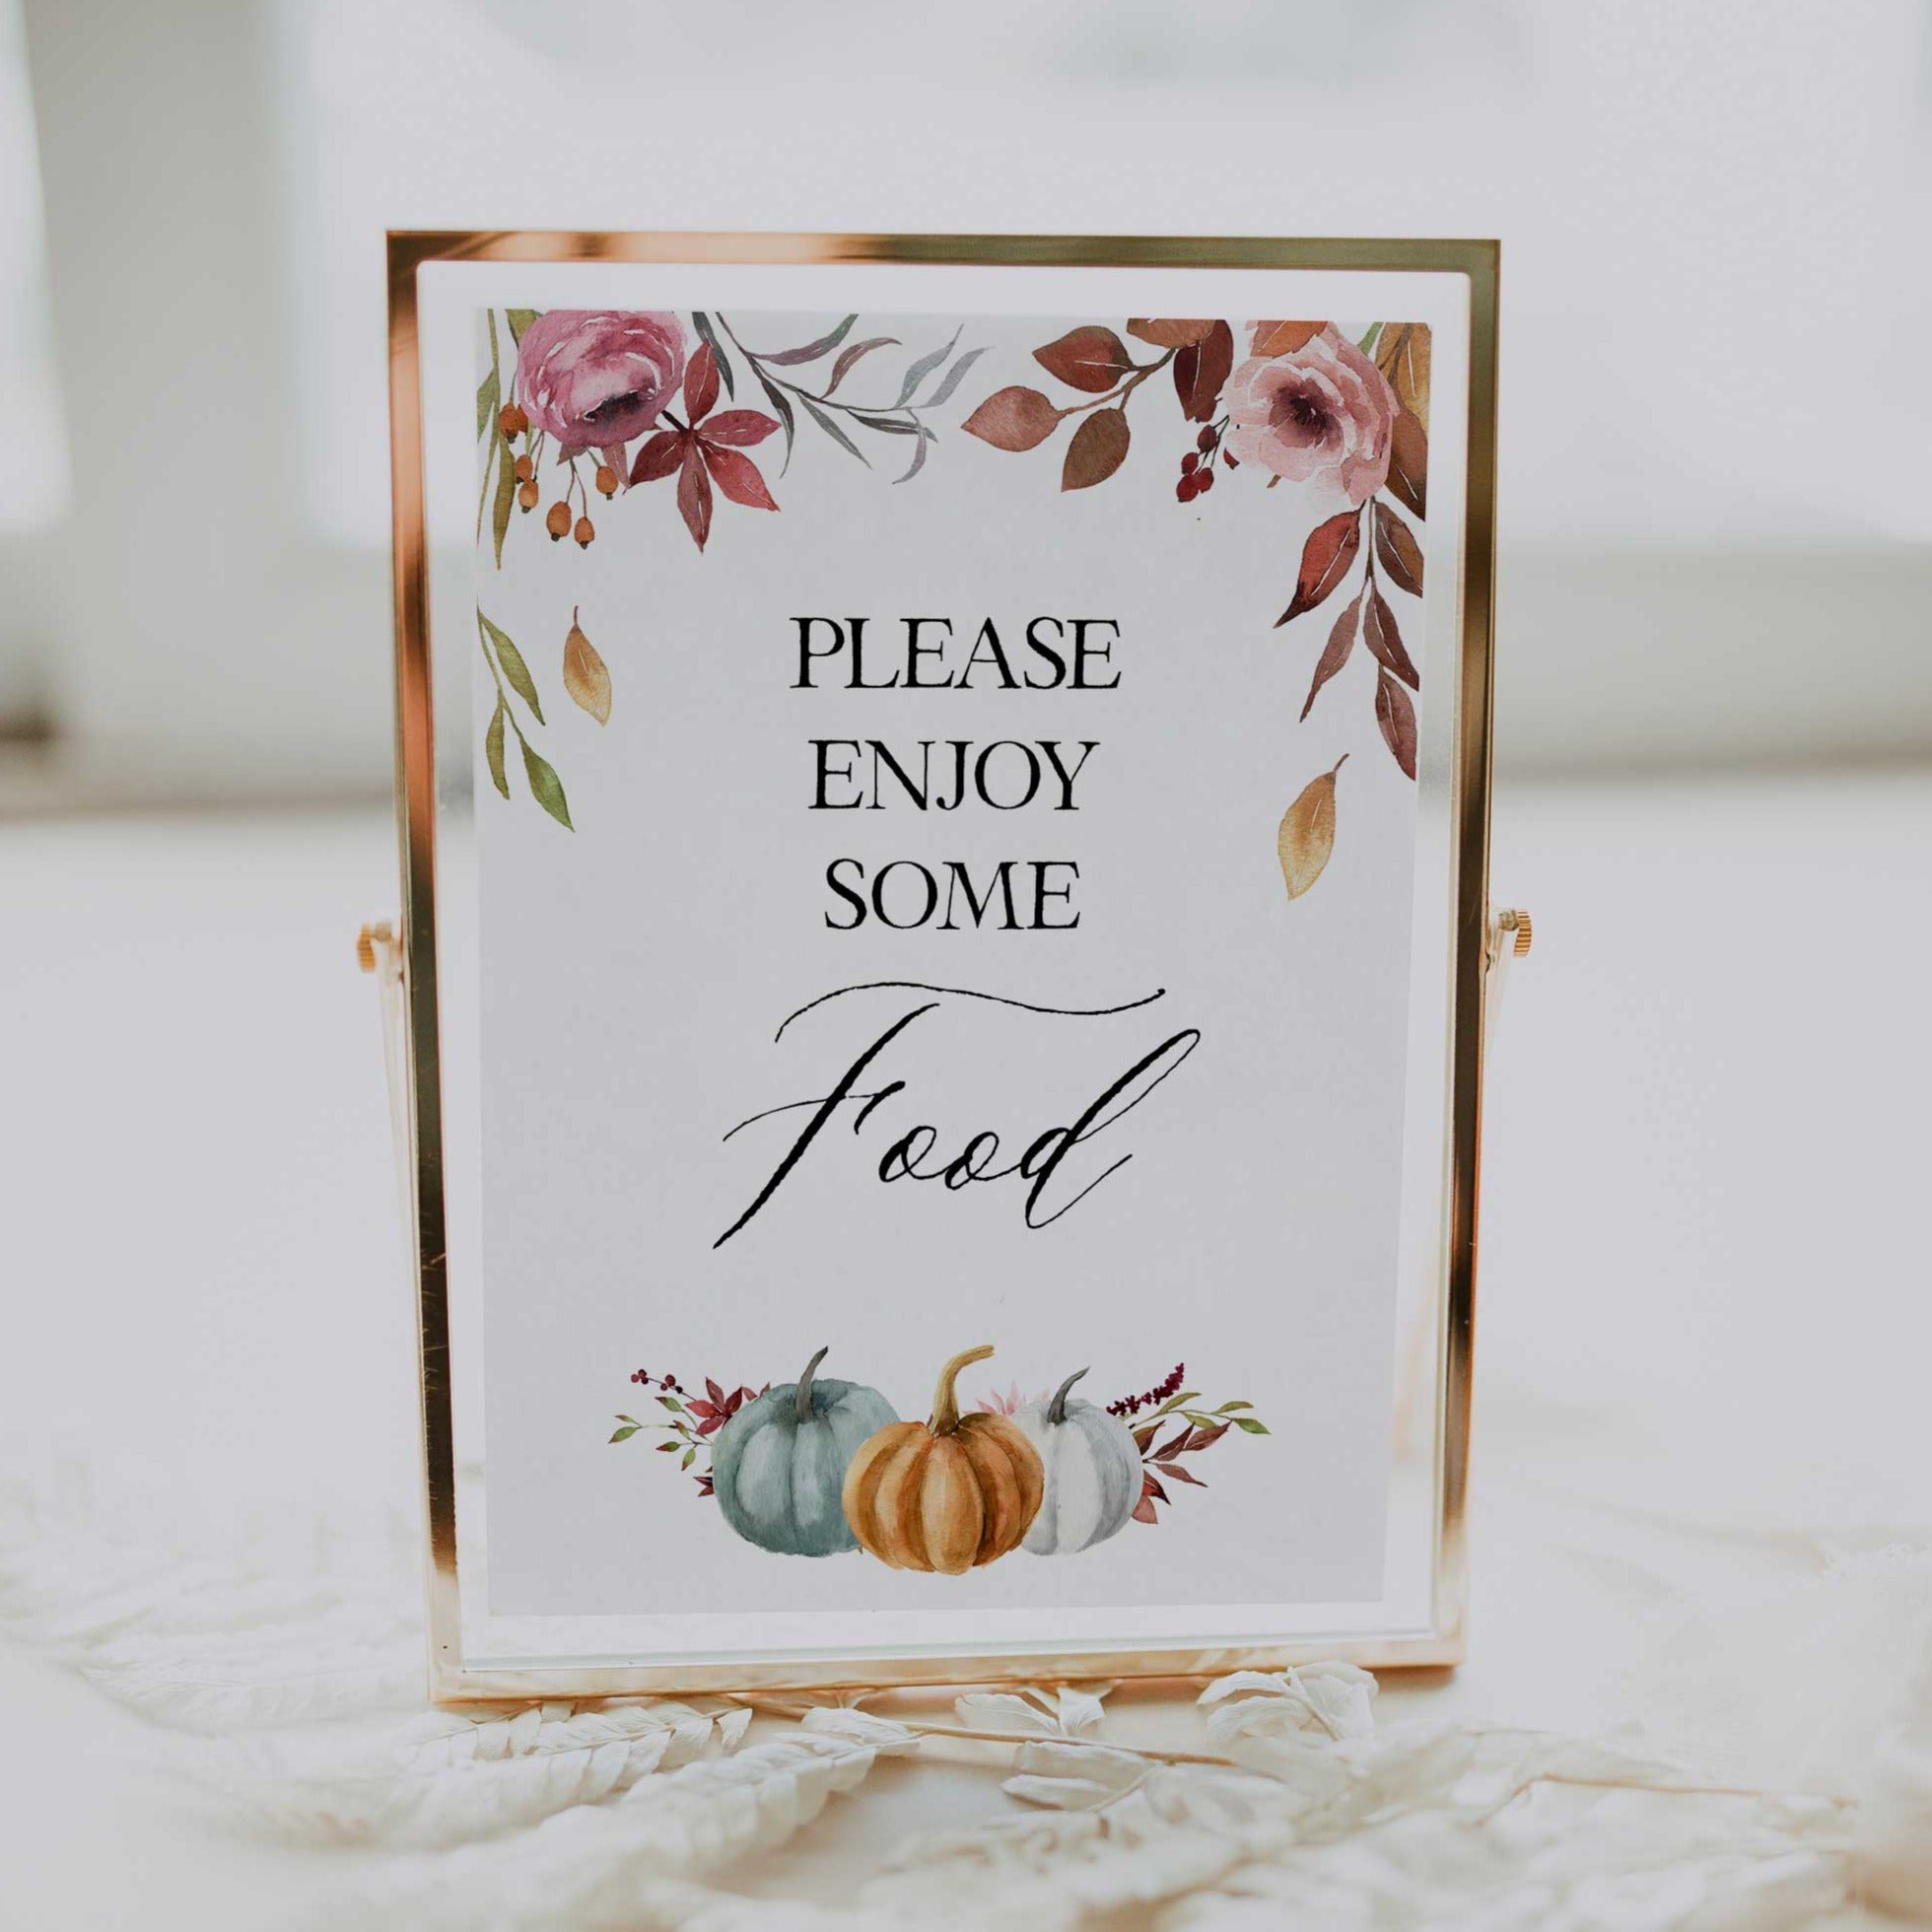 Fully editable and printable baby shower 8 table signs with a fall pumpkin design. Perfect for a Fall Pumpkin baby shower themed party